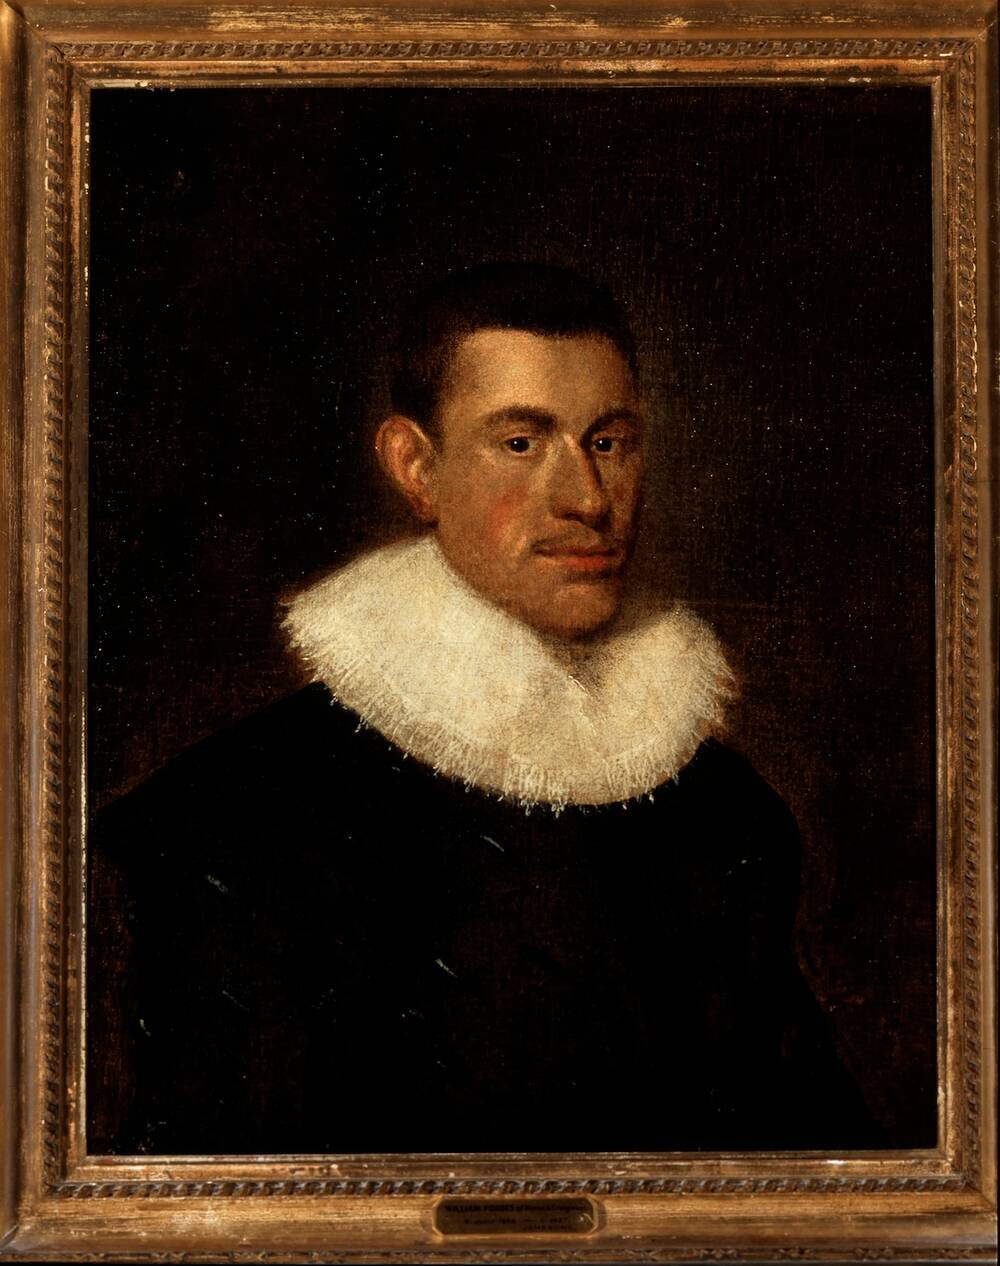 A framed portrait of a man against a dark plain background, wearing black clothes and a wide white ruff high on his neck. He is looking directly out towards to the viewer: his head is turned slightly to the side but his eyes are forward.